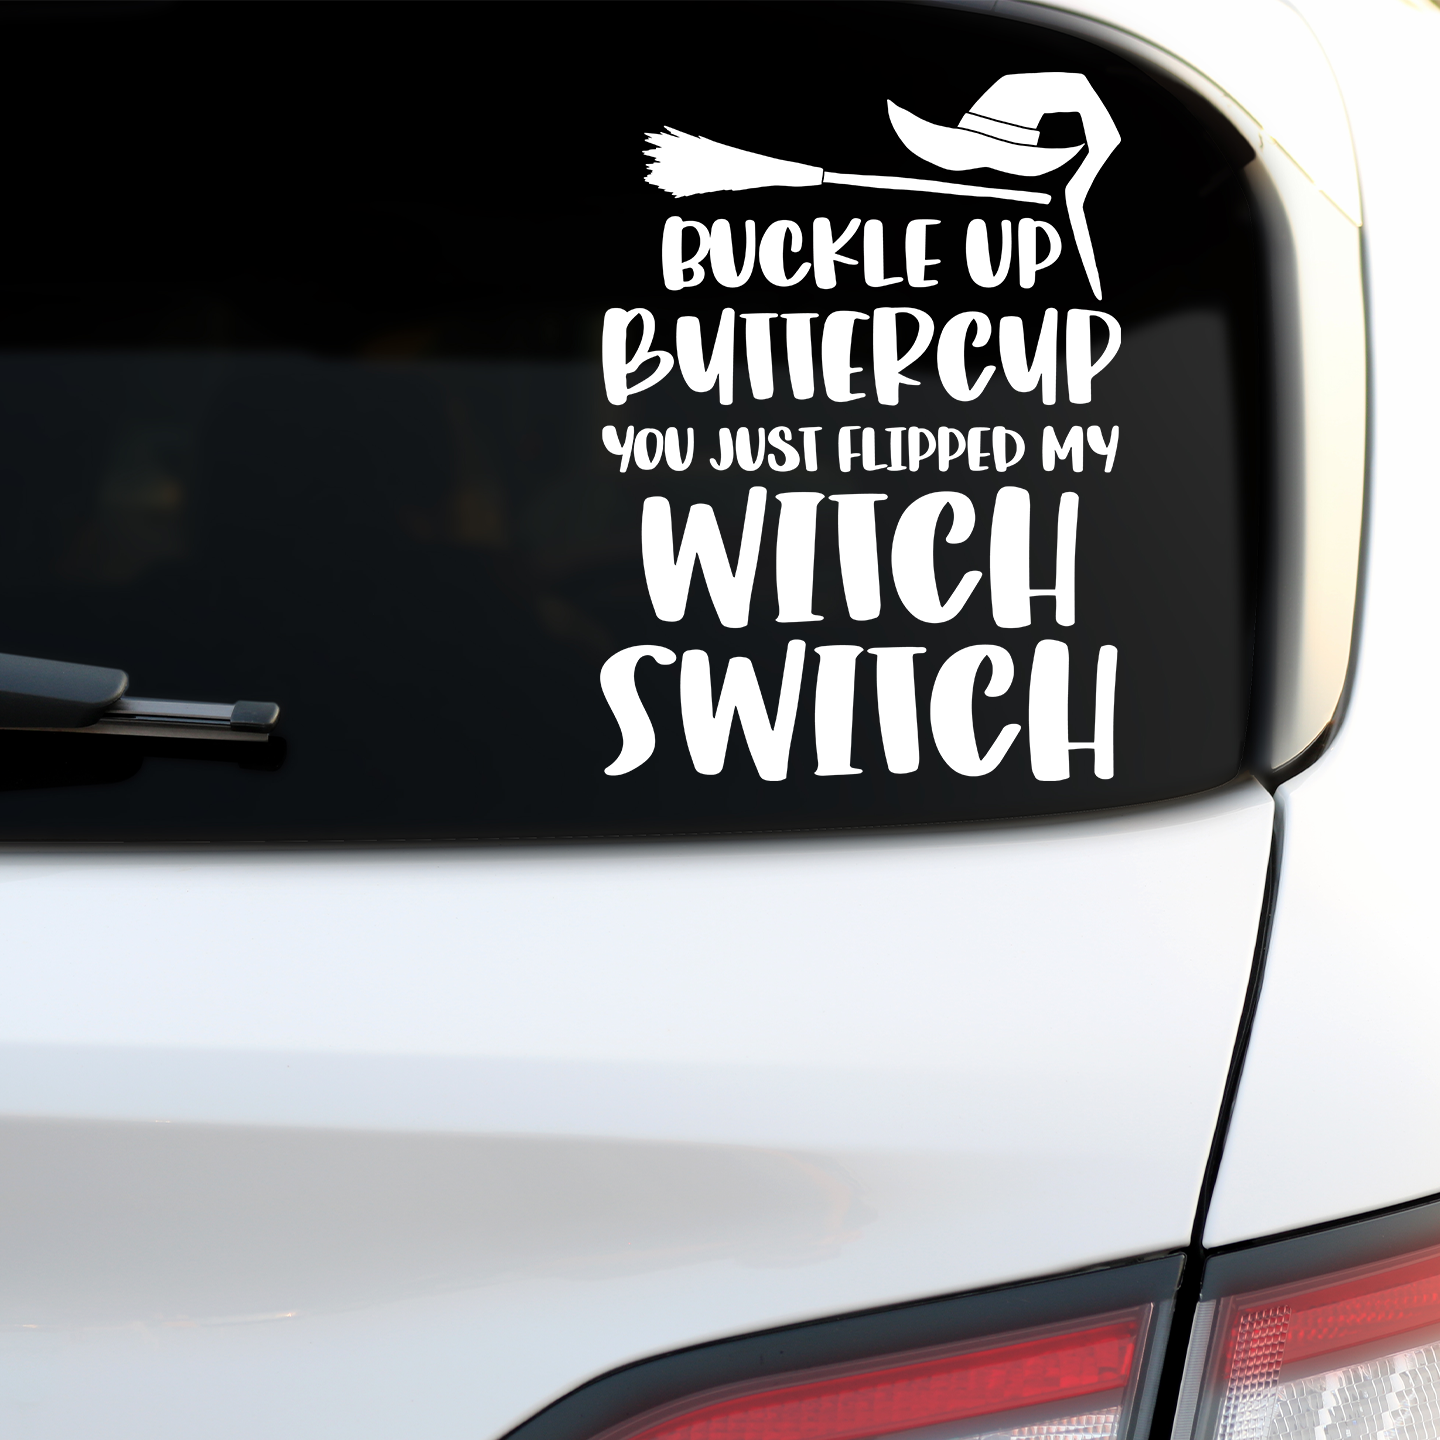 Buckle Up Buttercup Witch Switch Sticker